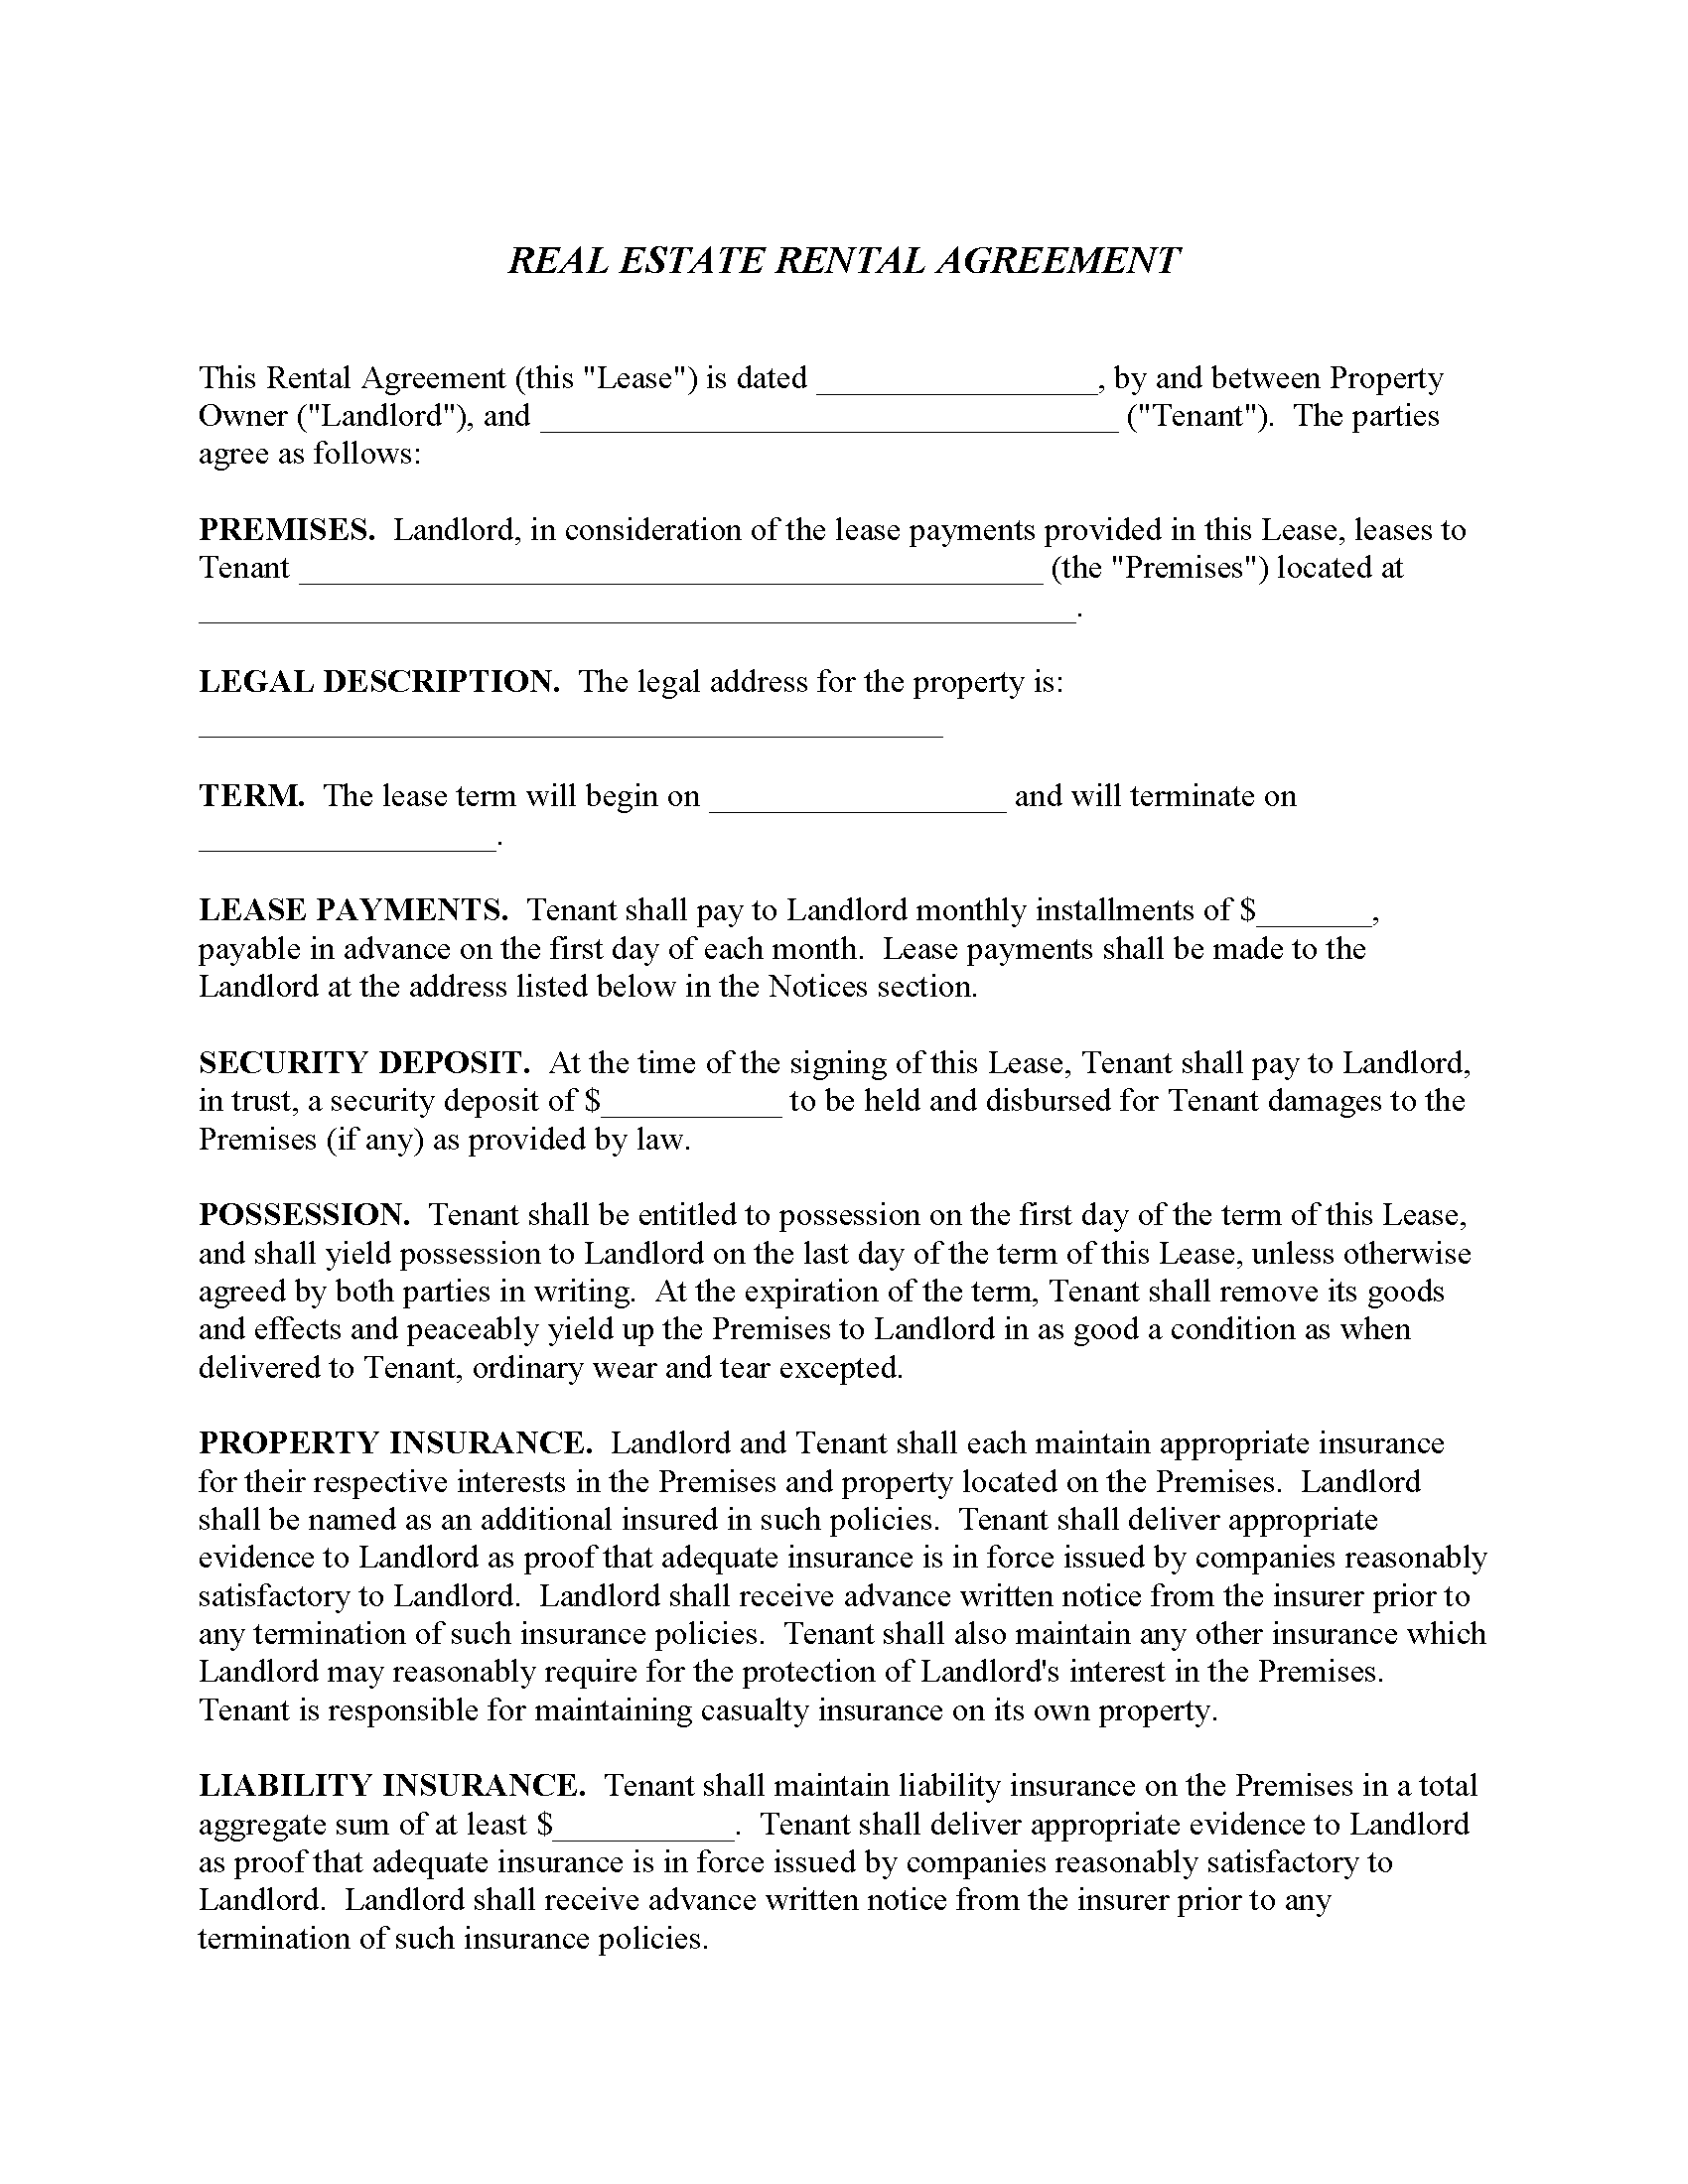 commercial property rental agreement fillable pdf free